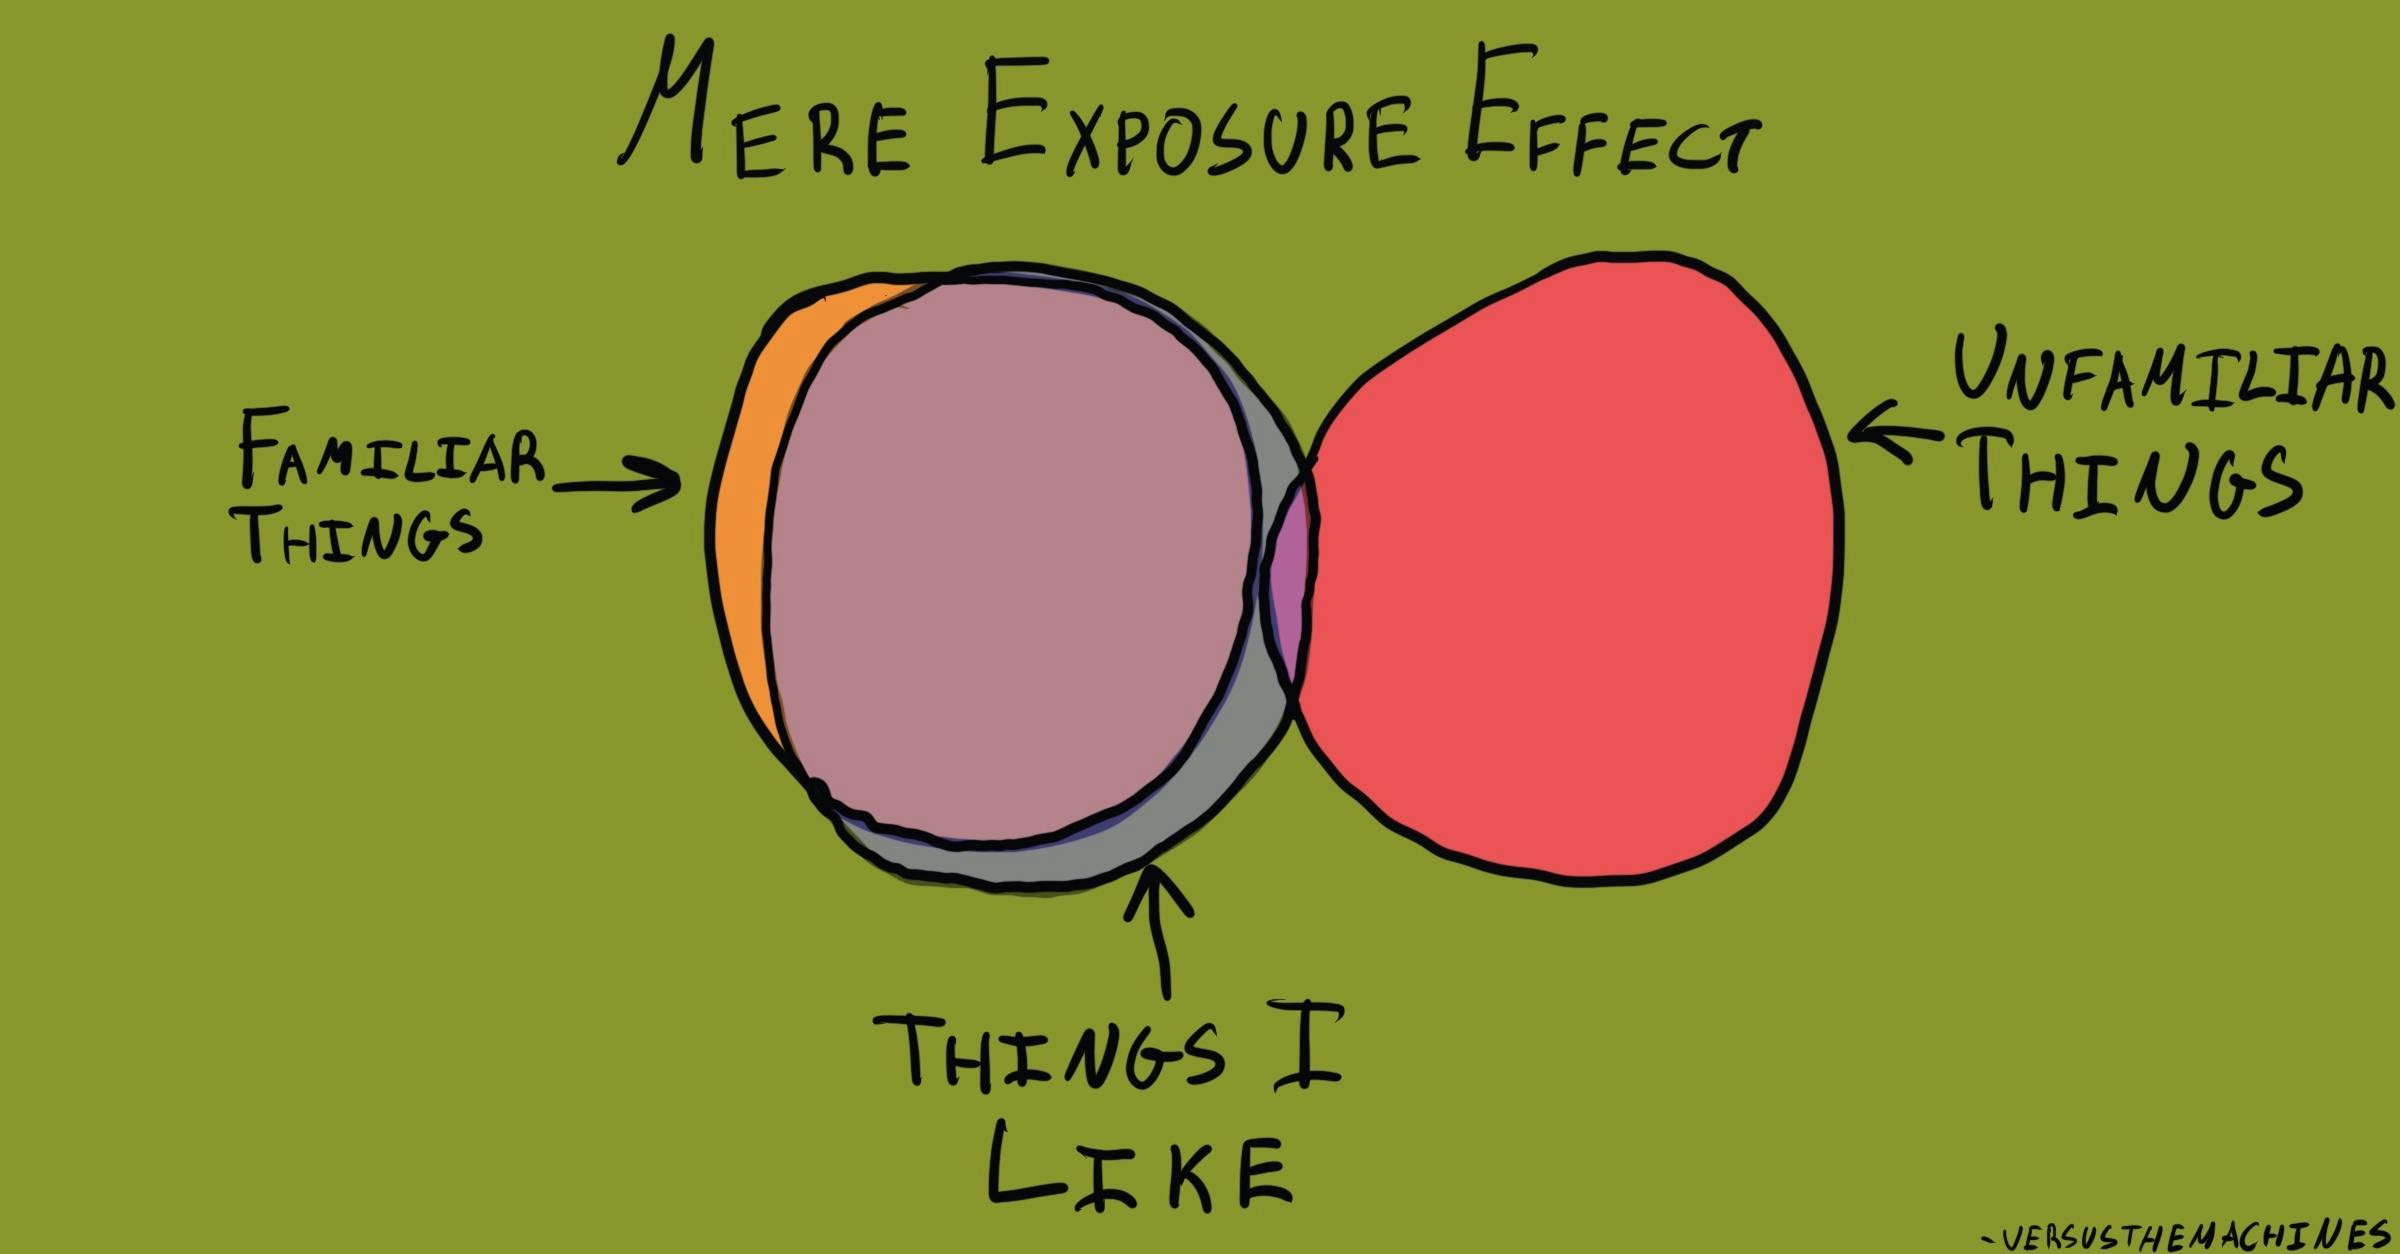 Mere Exposure Effect - The Decision Lab